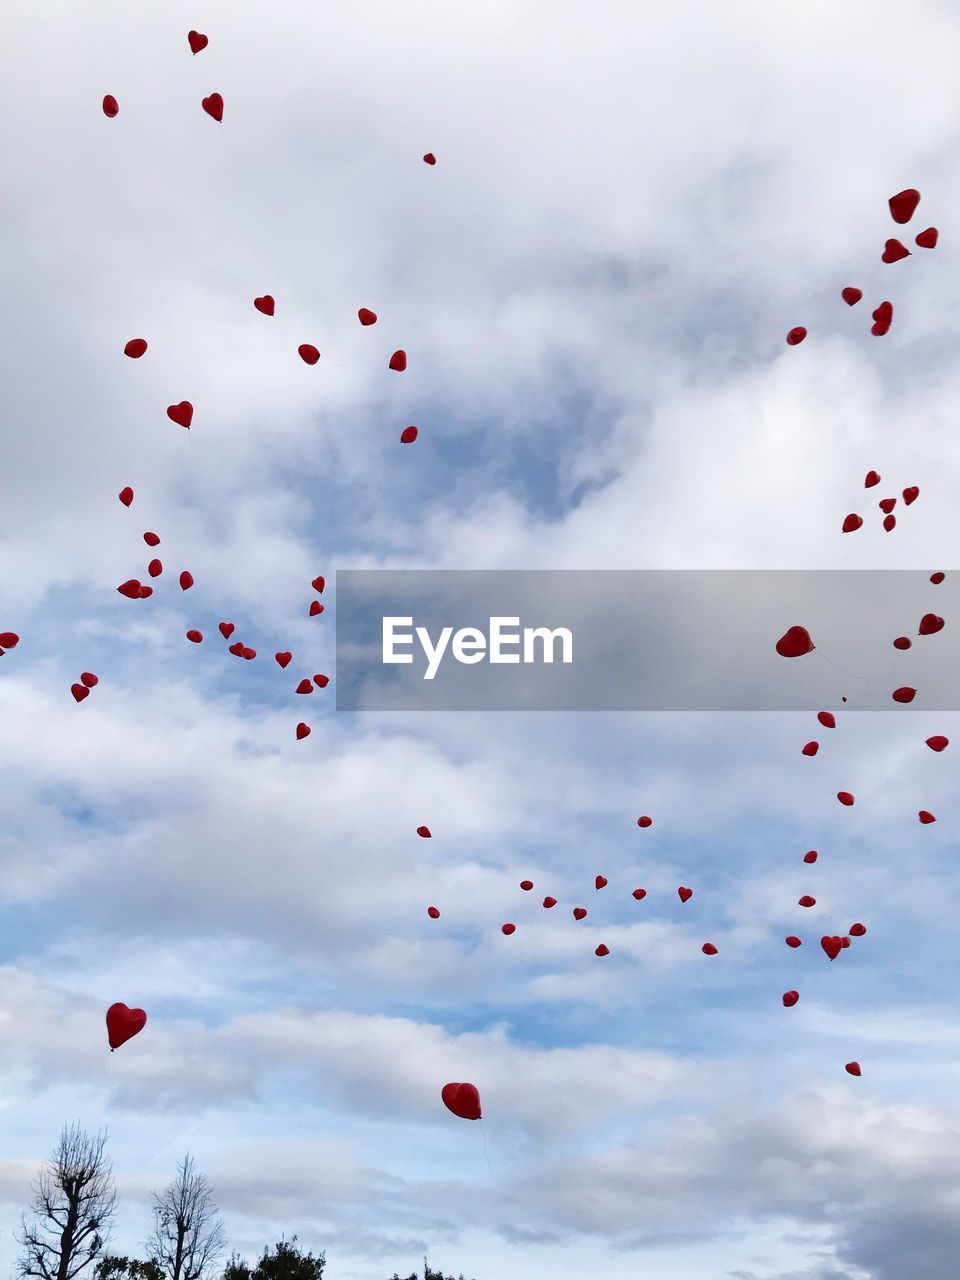 Low angle view of balloons flying against cloudy sky